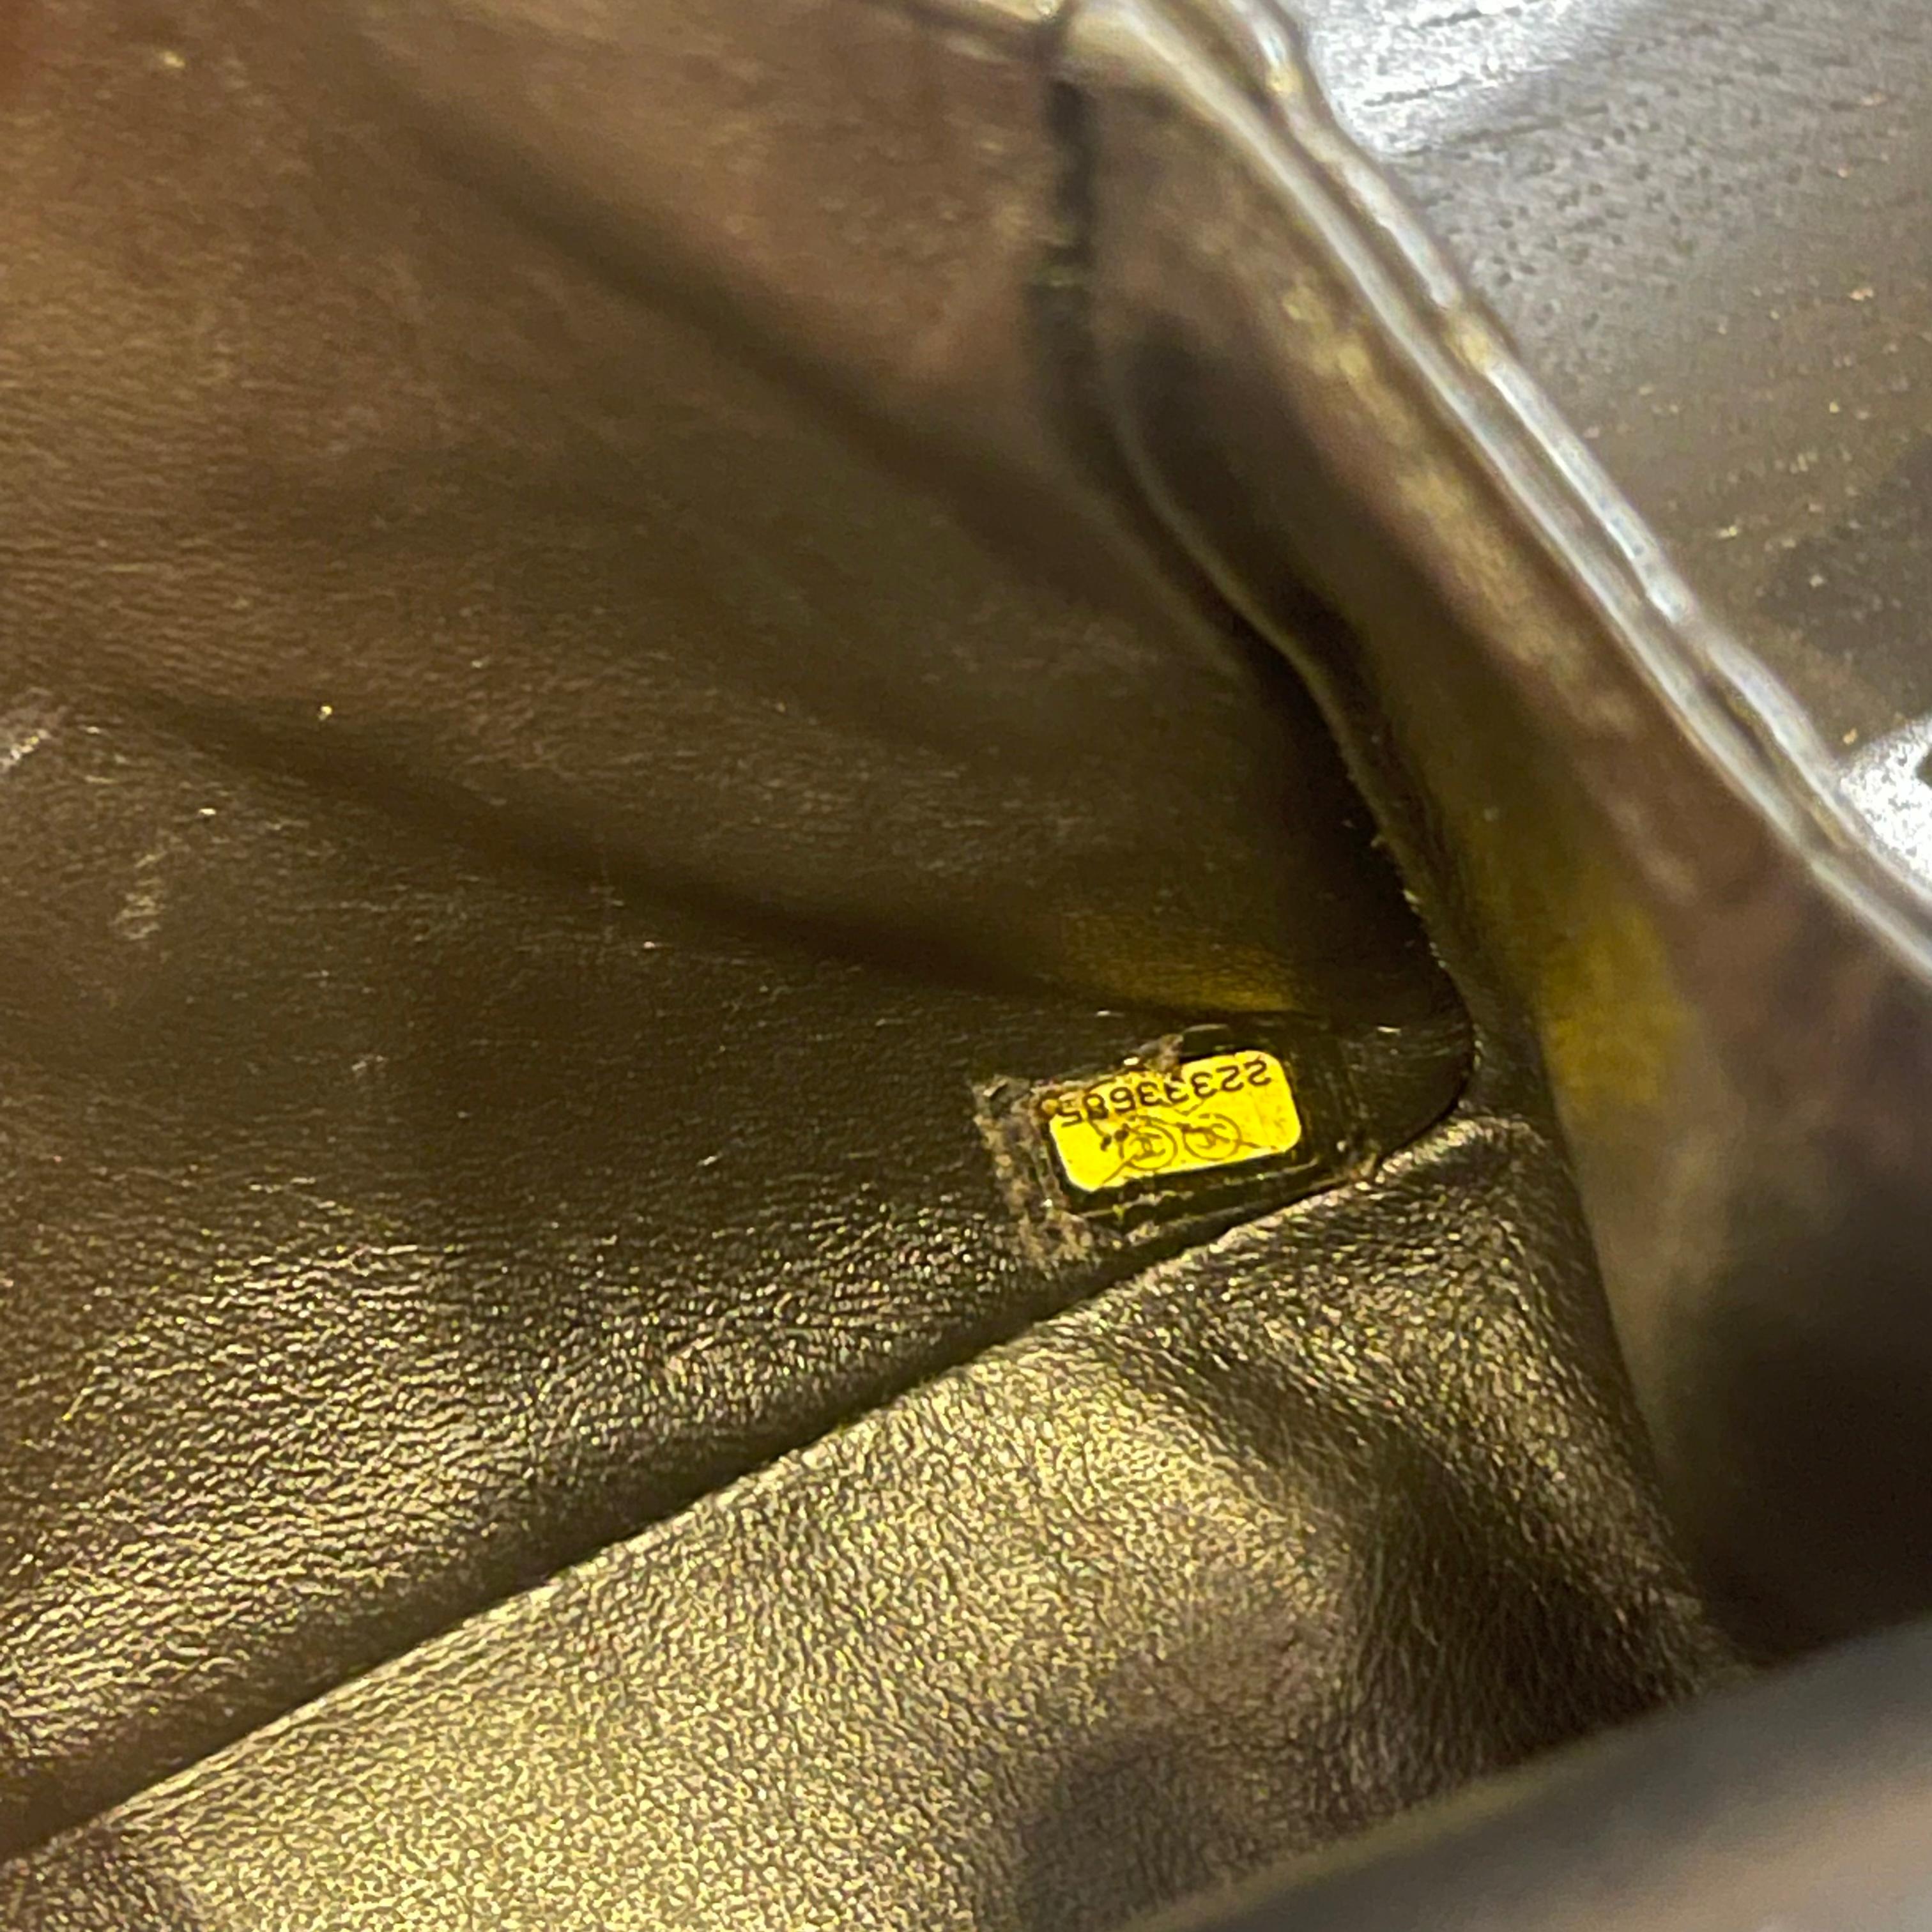 A rare collectors casino charm reissue bag. Slight wear throughout, with slightly broken hologram sticker. Faint scuffs and marks on the leather surface and corners. Turn-lock has slightly tarnished. Missing its card. Comes with holo and dust bag